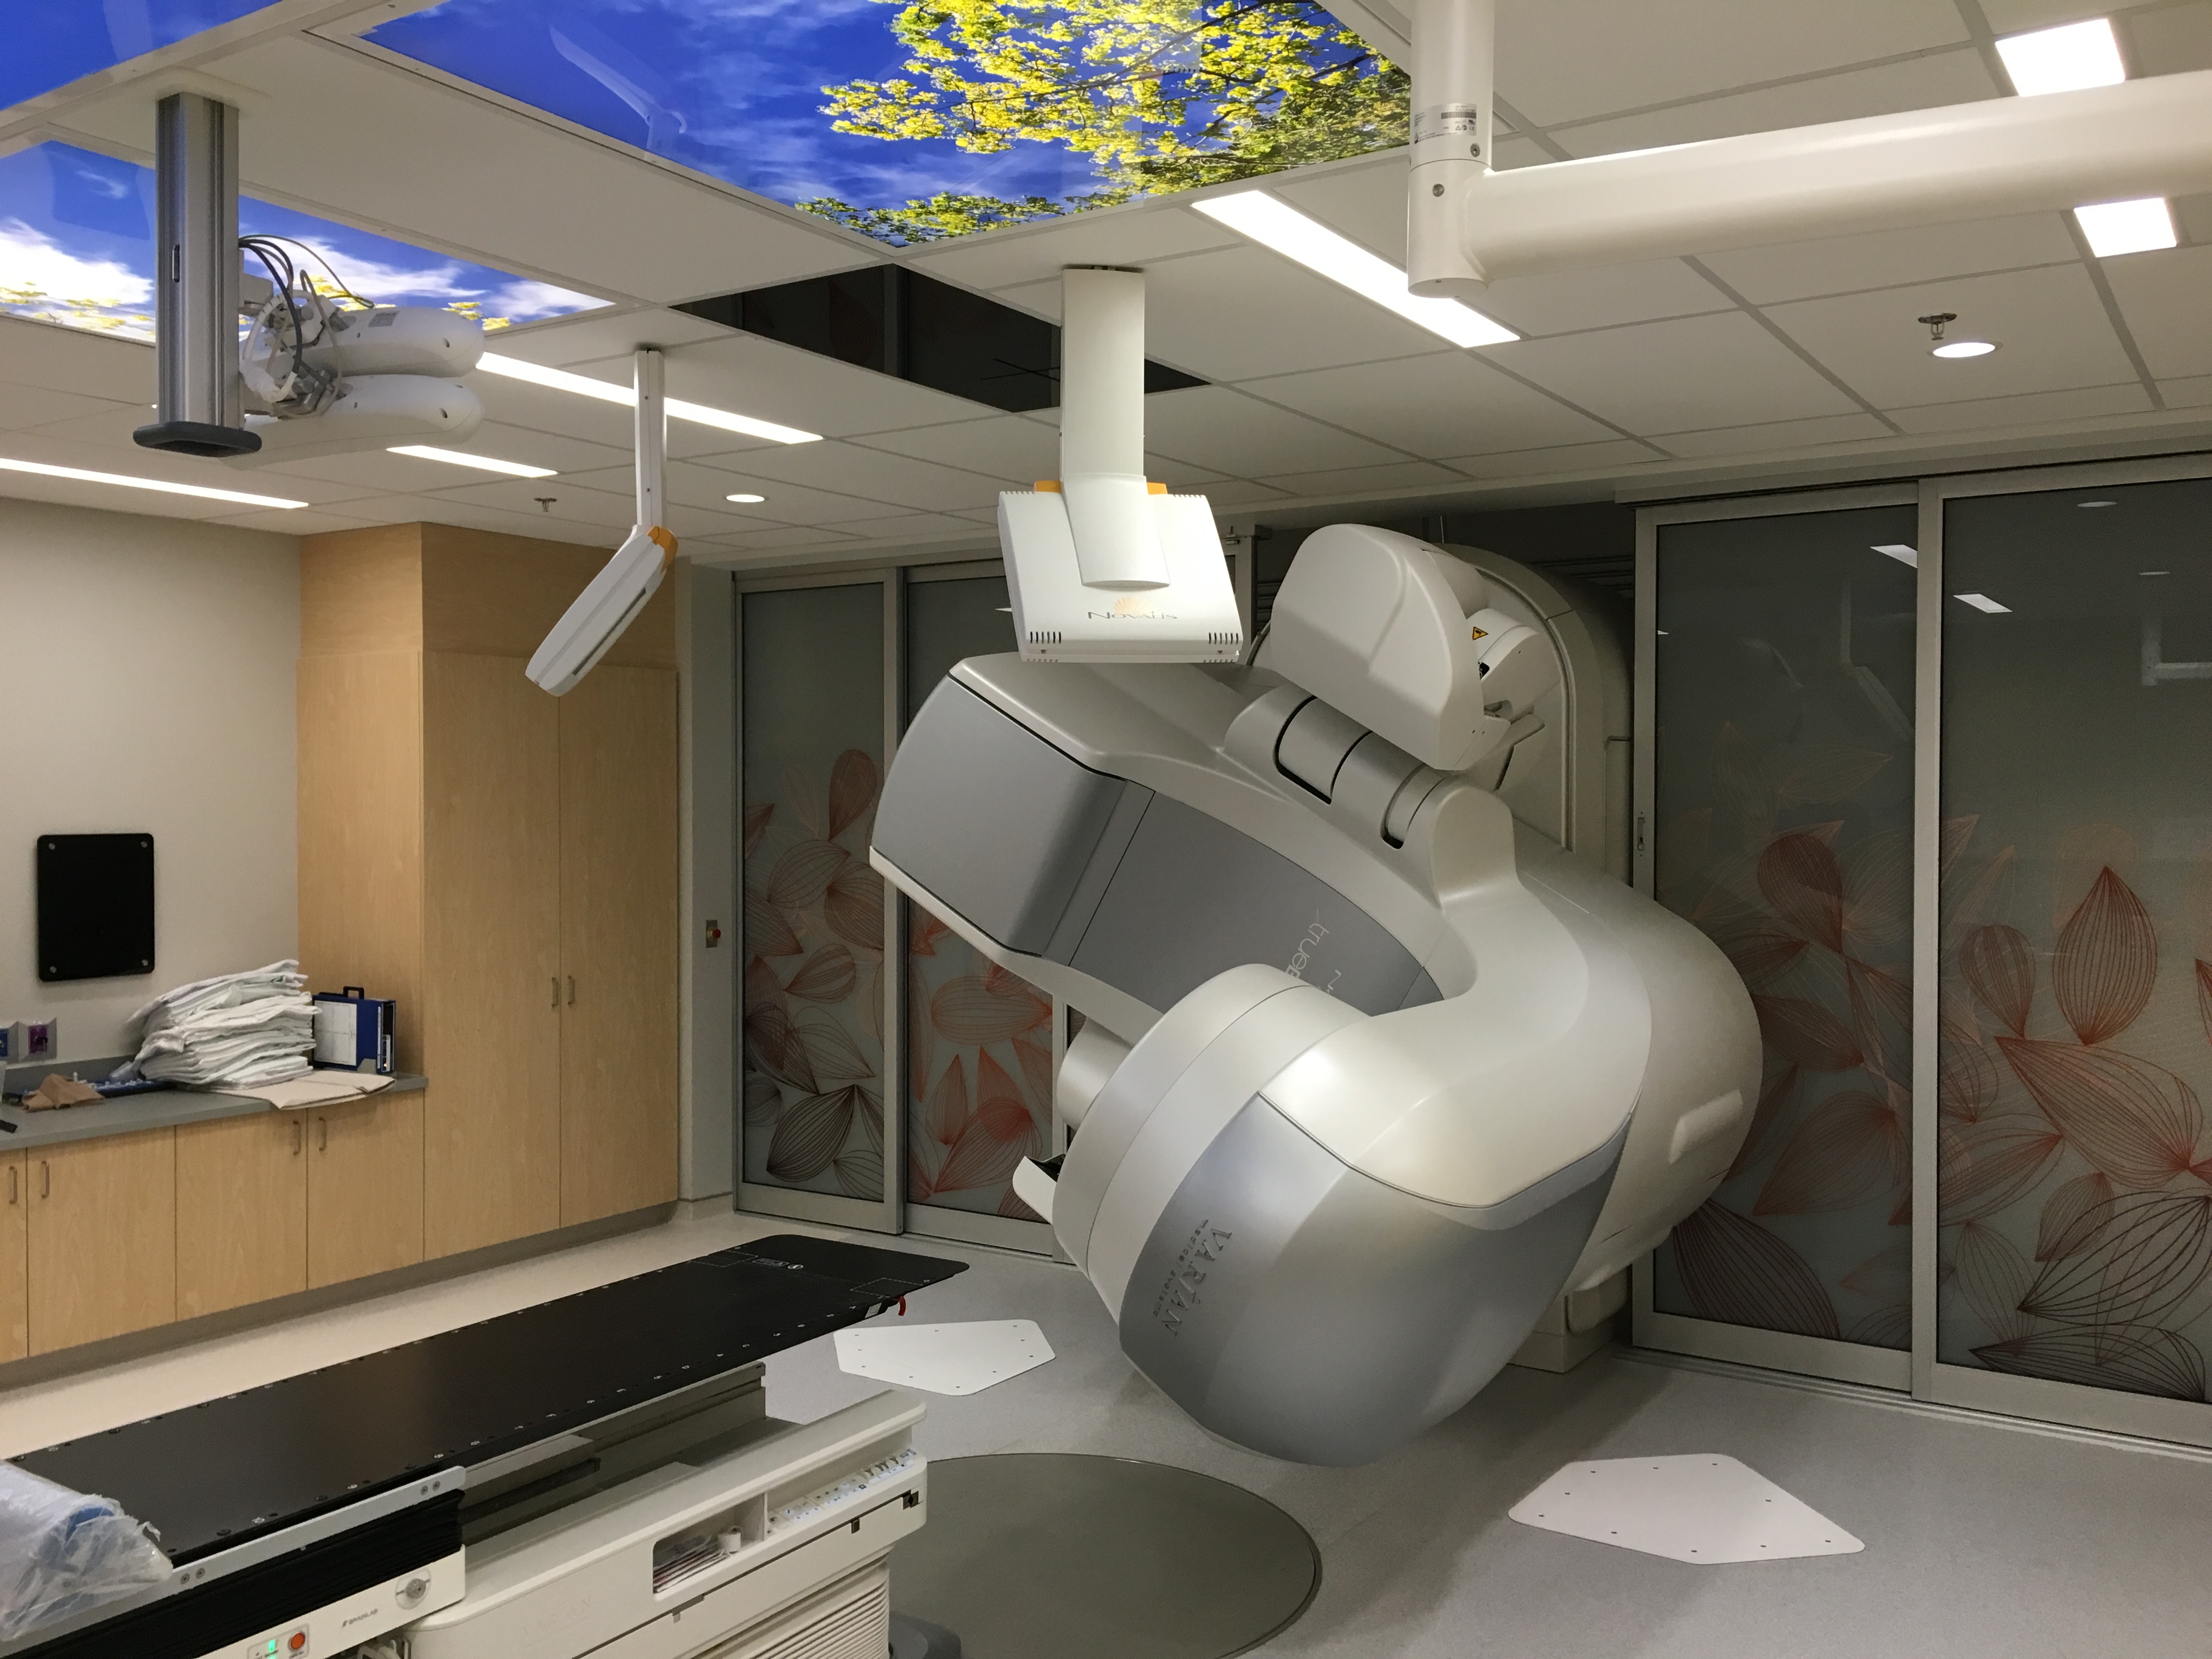 State-of-the-art linear accelerator